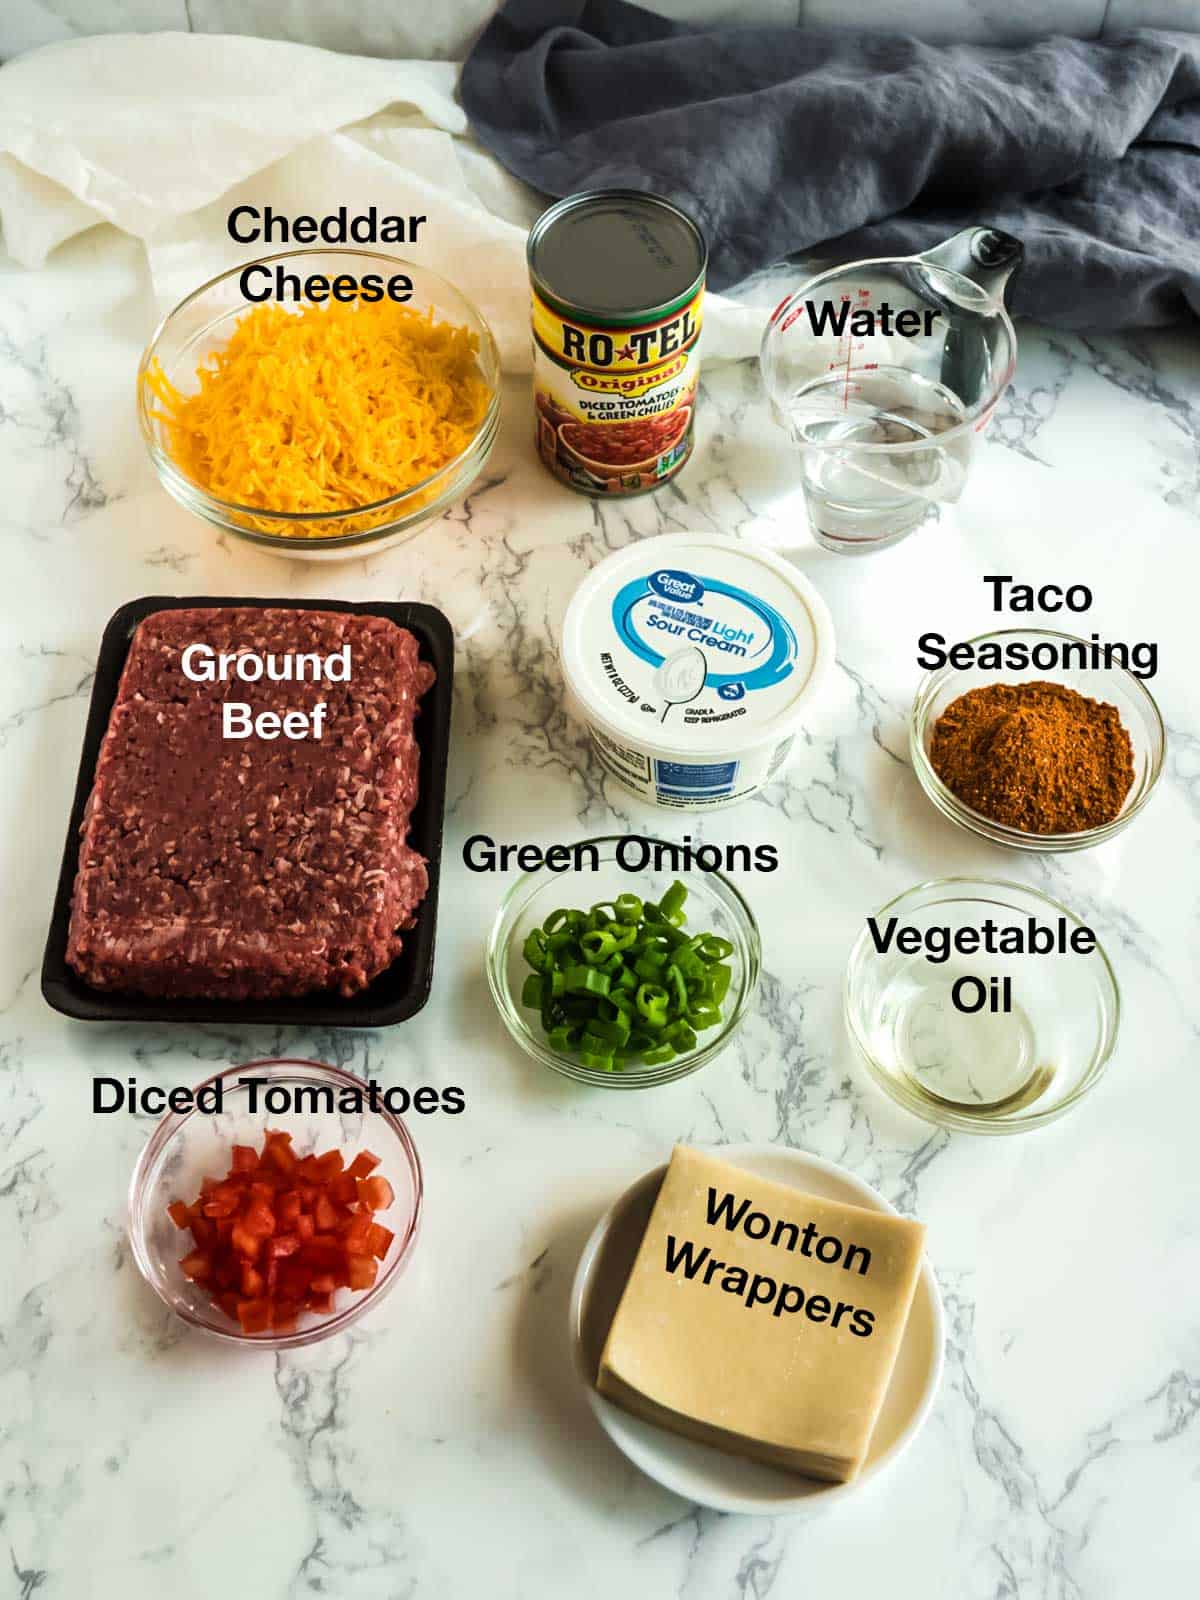 Ingredients for Tasty Taco Cups